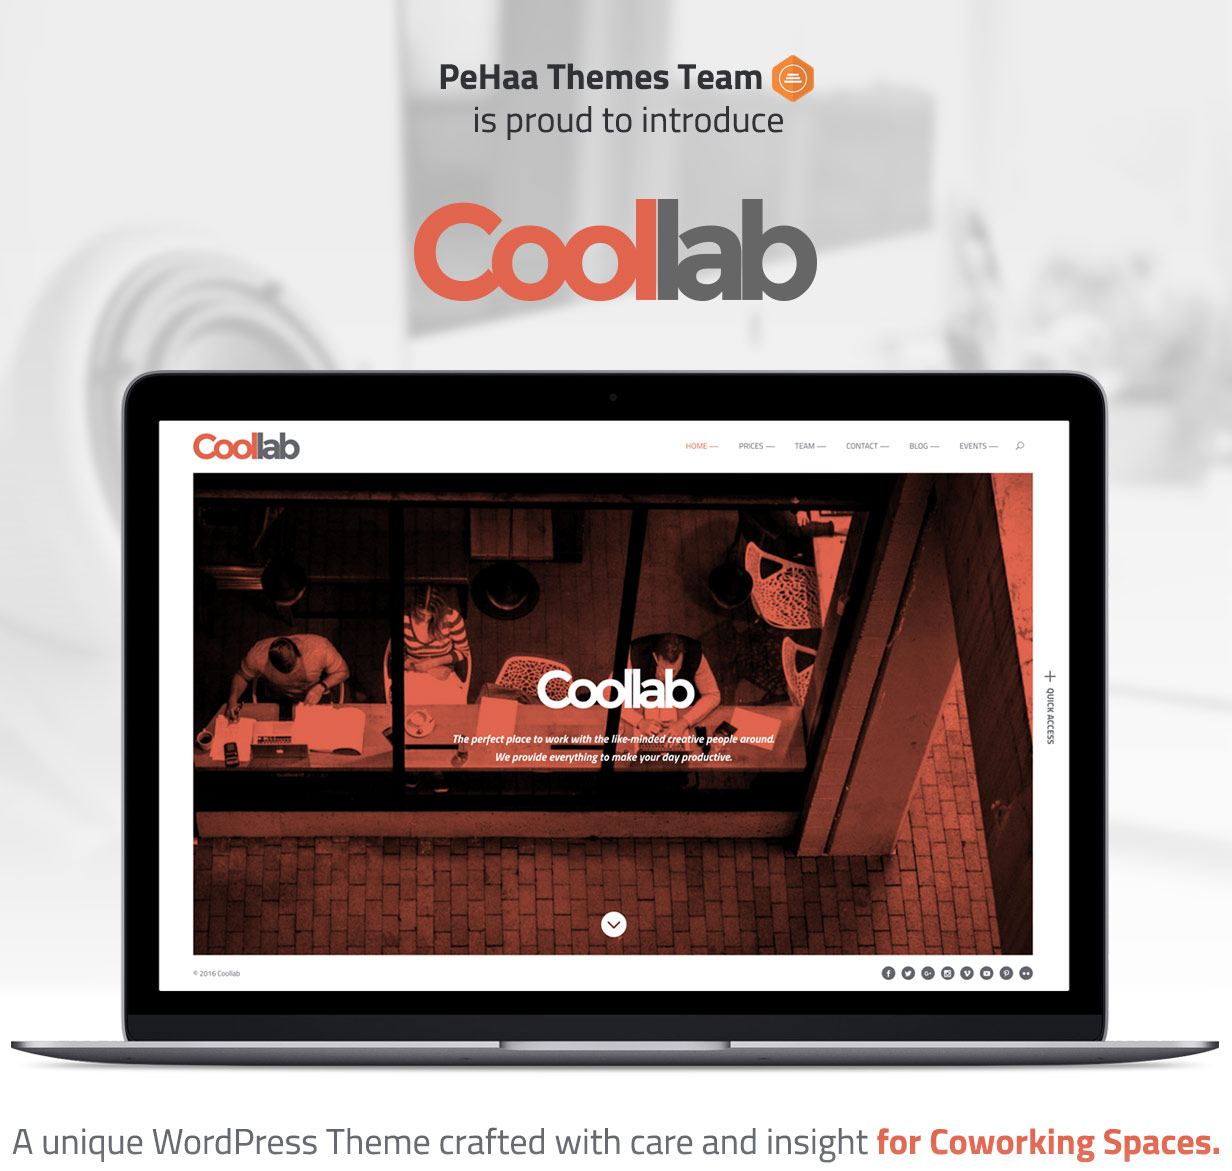 PeHaa Themes is proud to introduce Coollab.